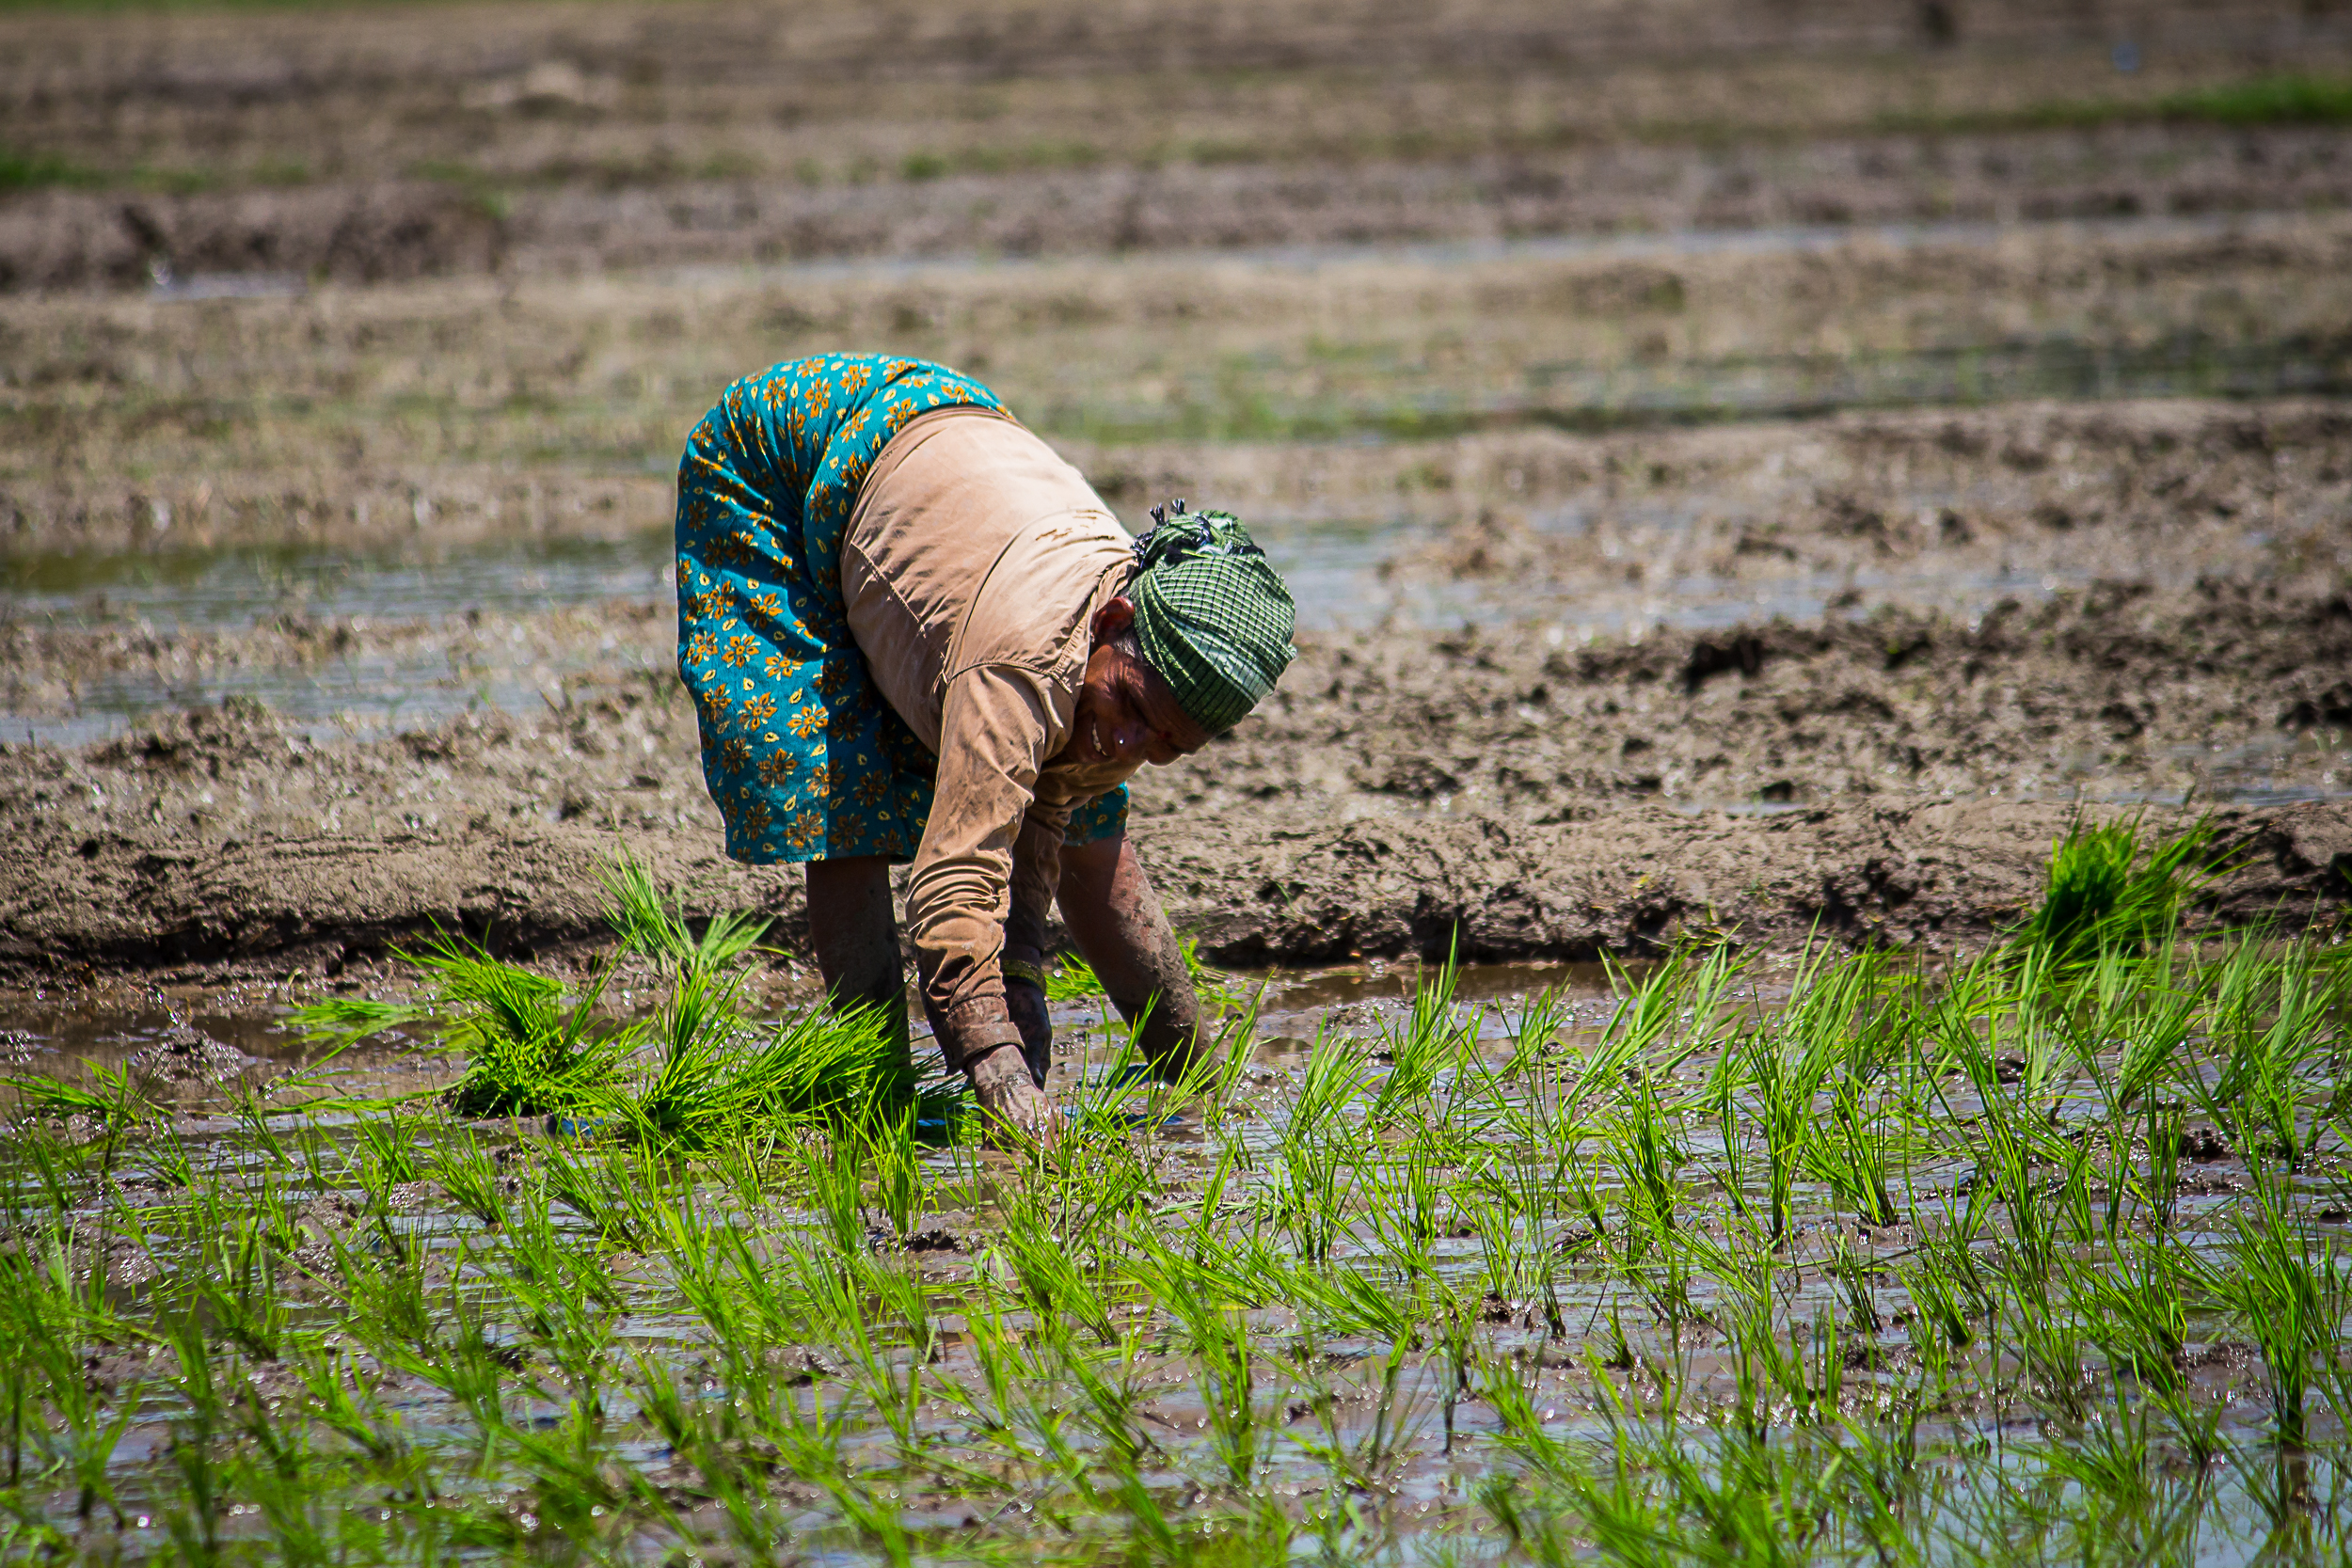 A Woman Farmer working in the Paddy Field